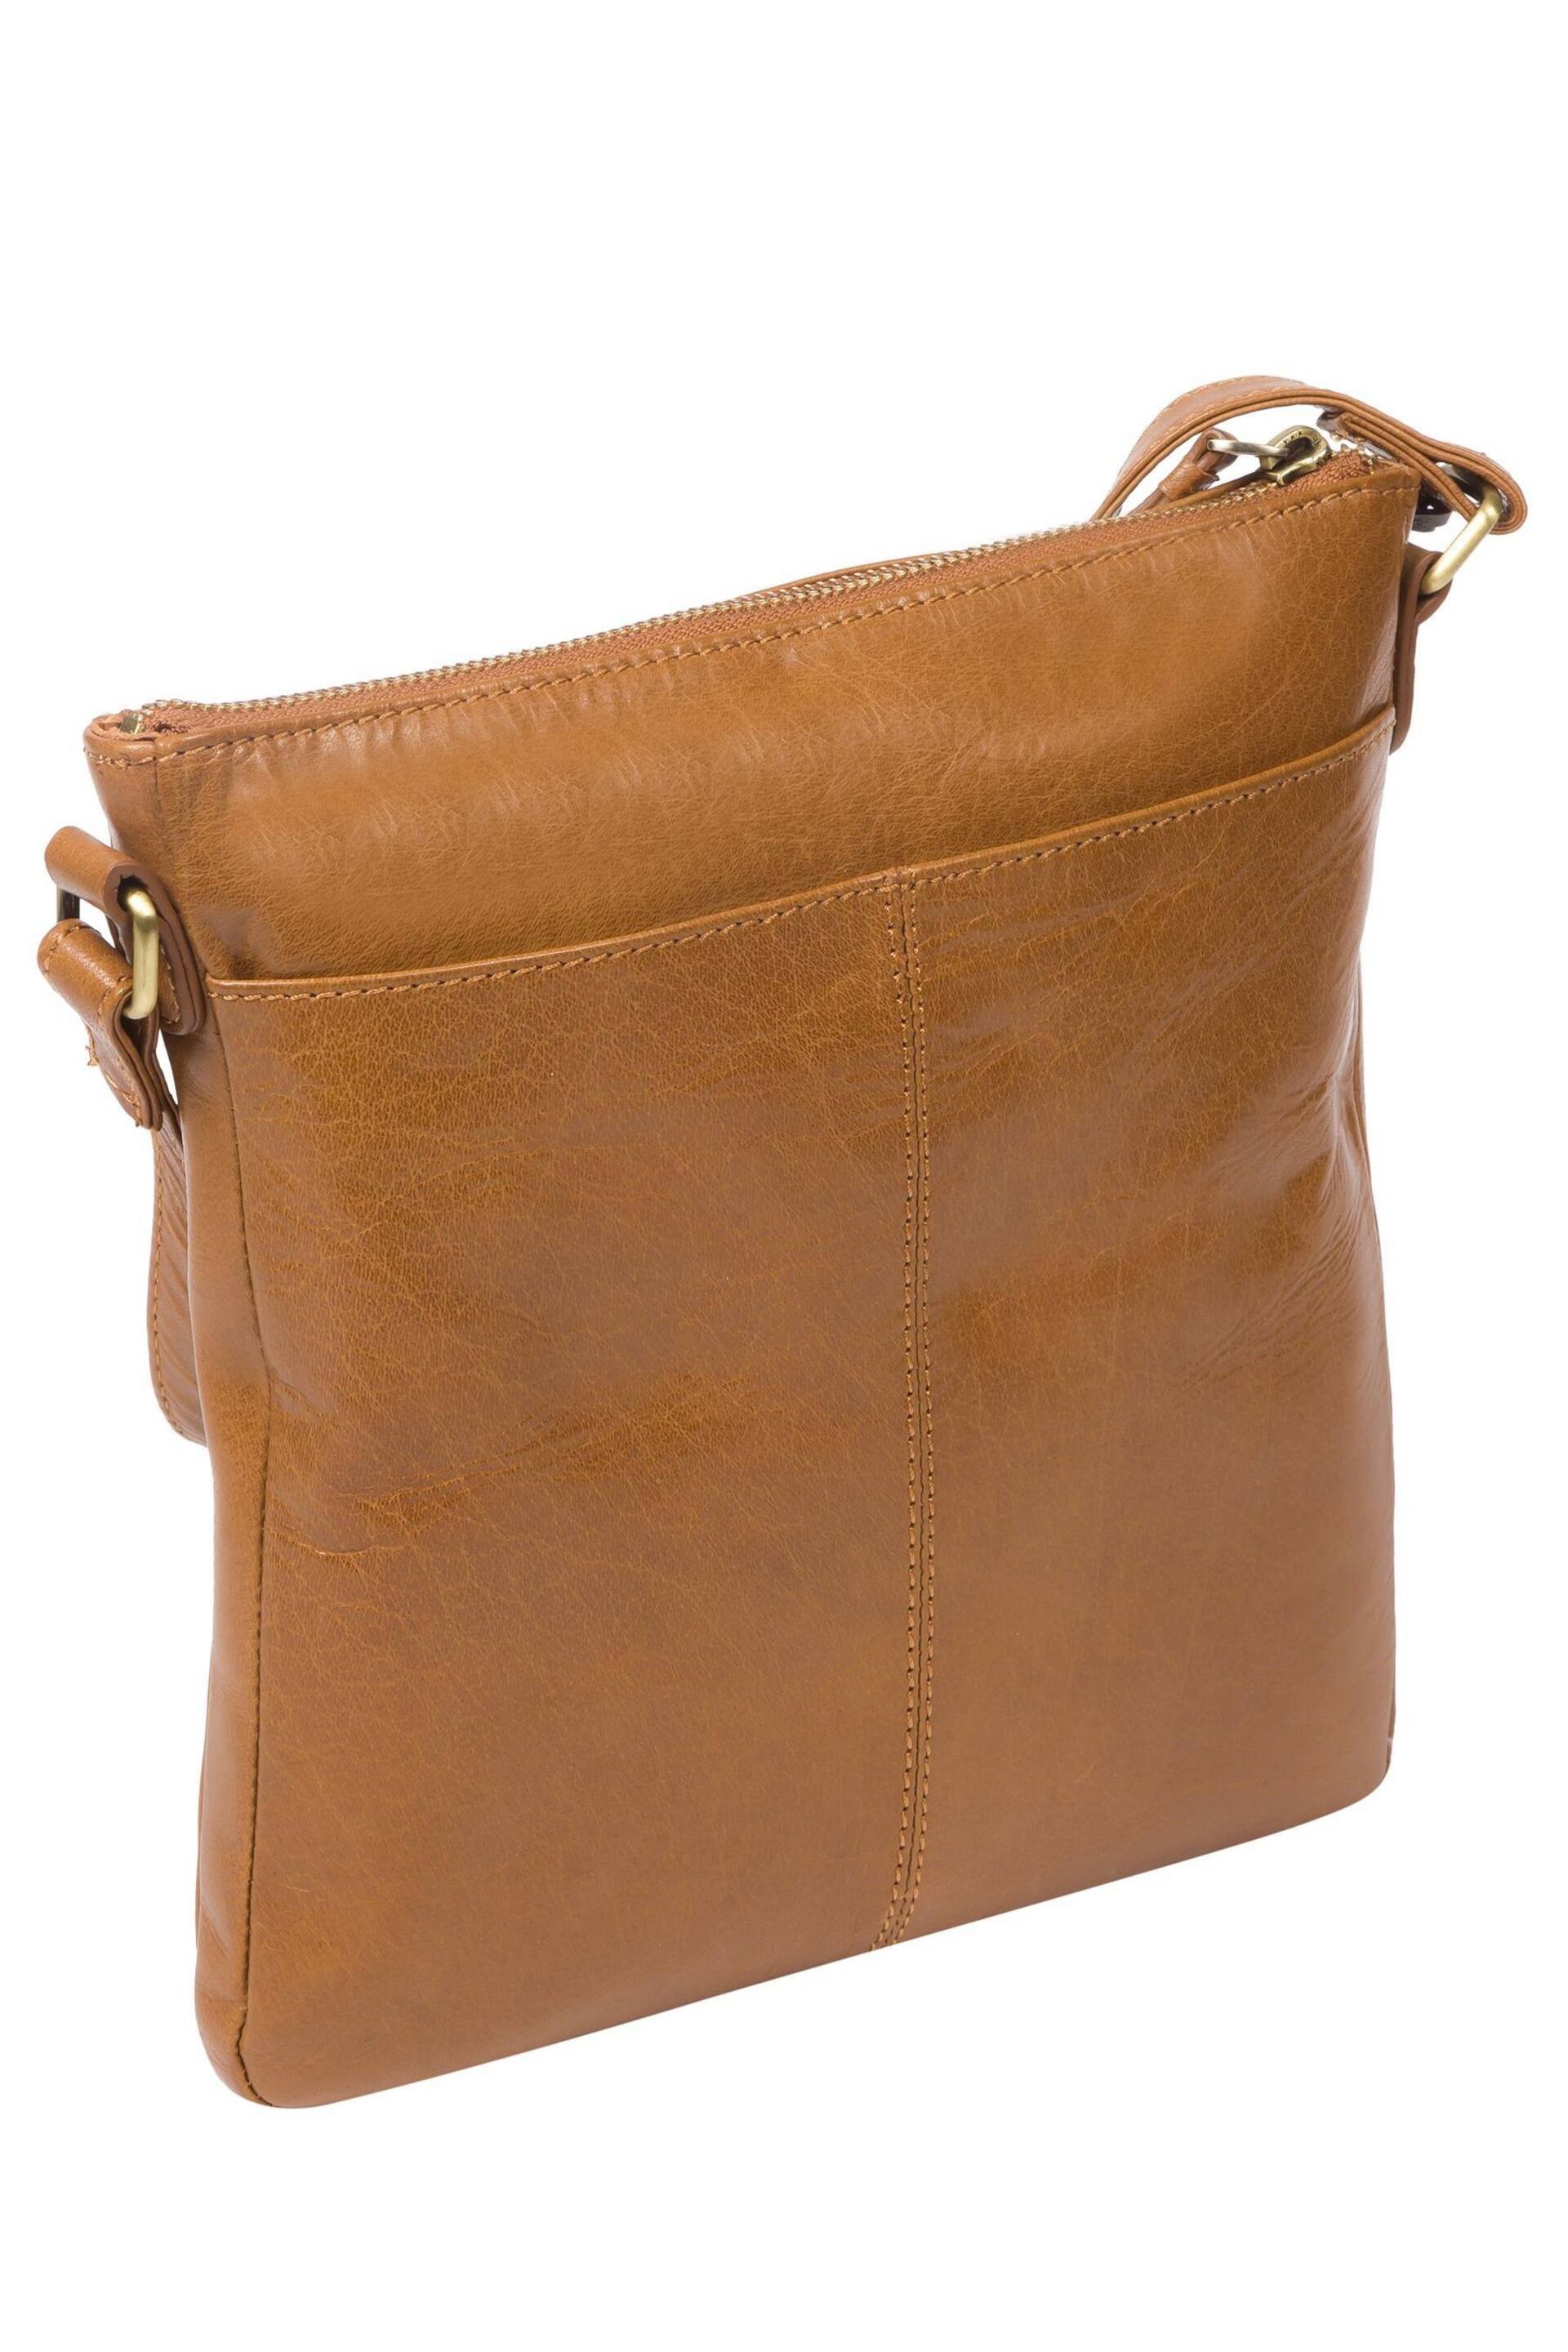 Conkca Avril Leather Cross-Body Bag - Image 4 of 5